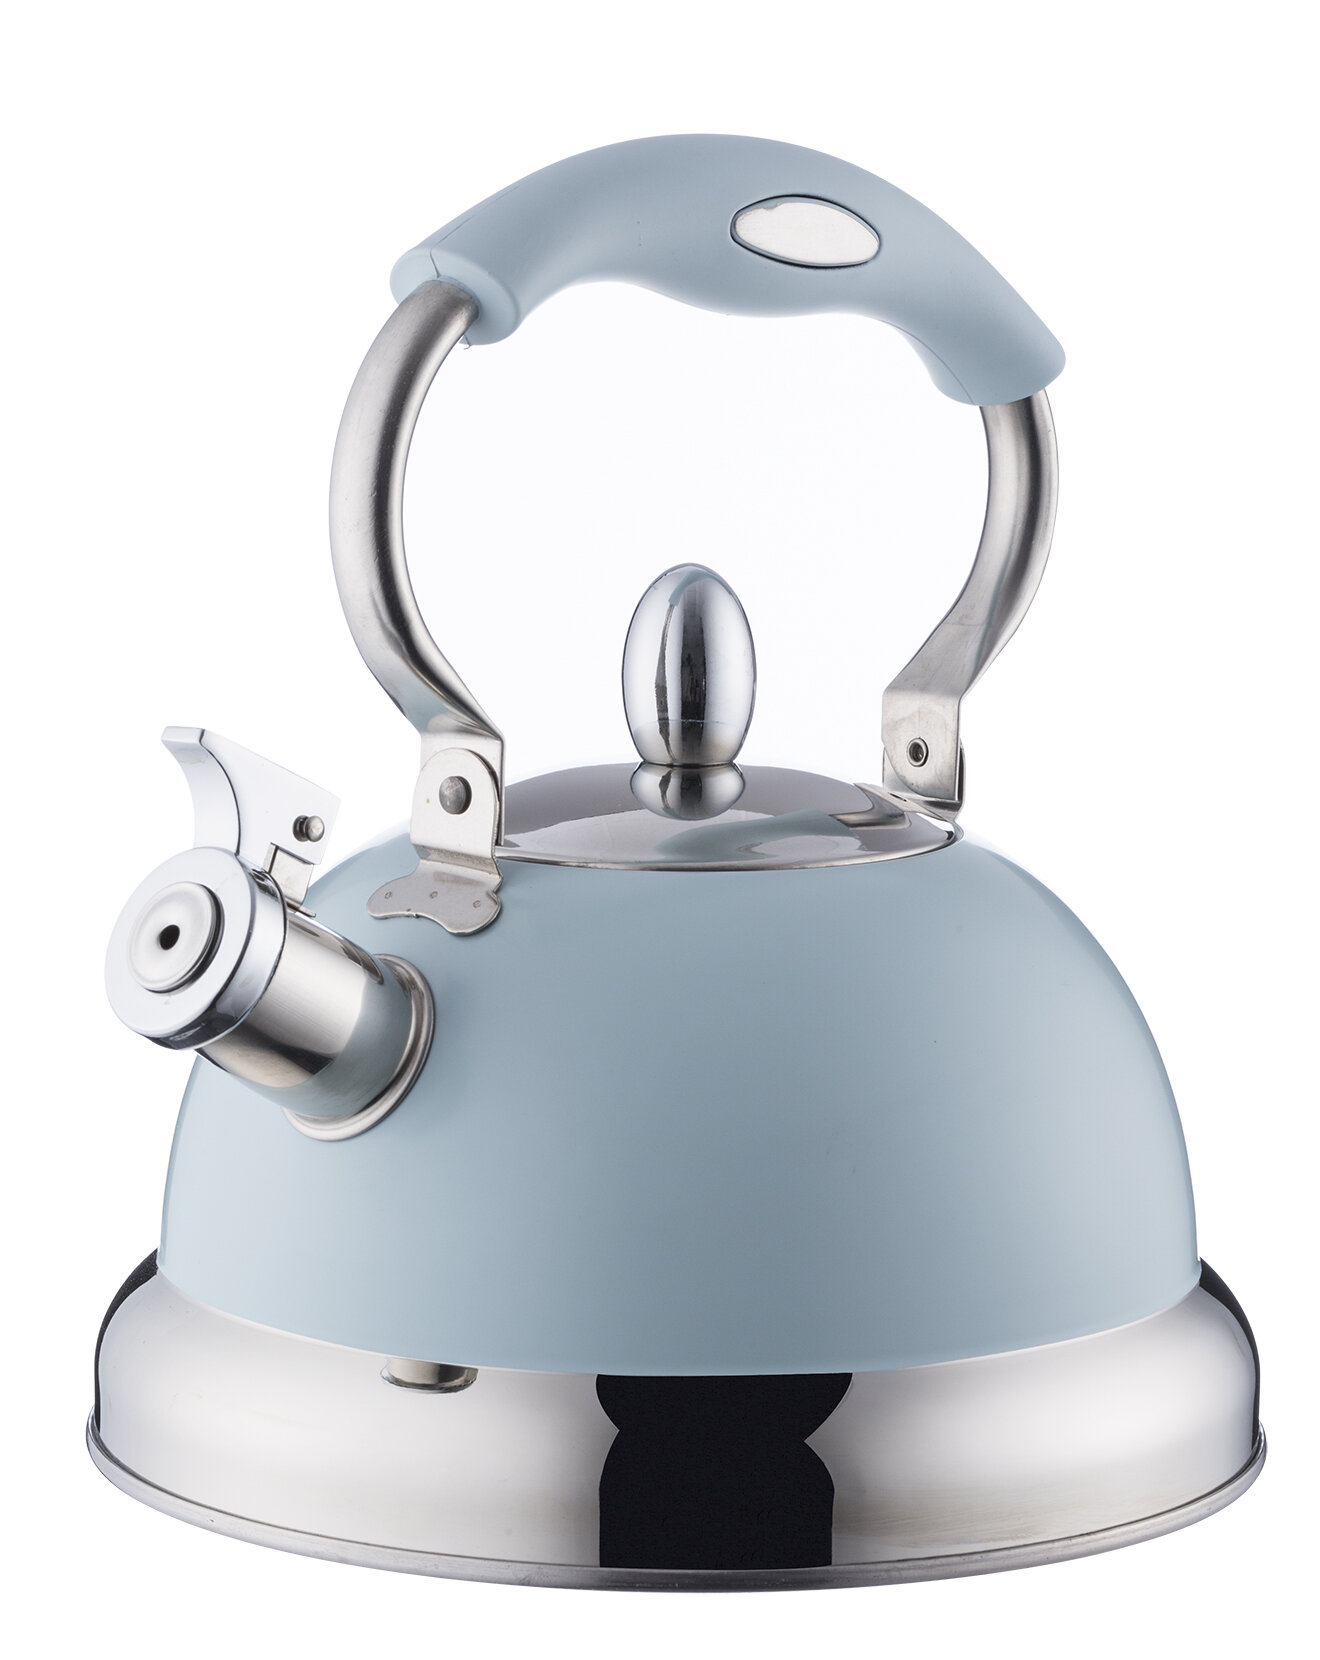 2.5L Stainless Steel Whistling Tea Kettle Boiling kettle Blew Coffee Water Pot